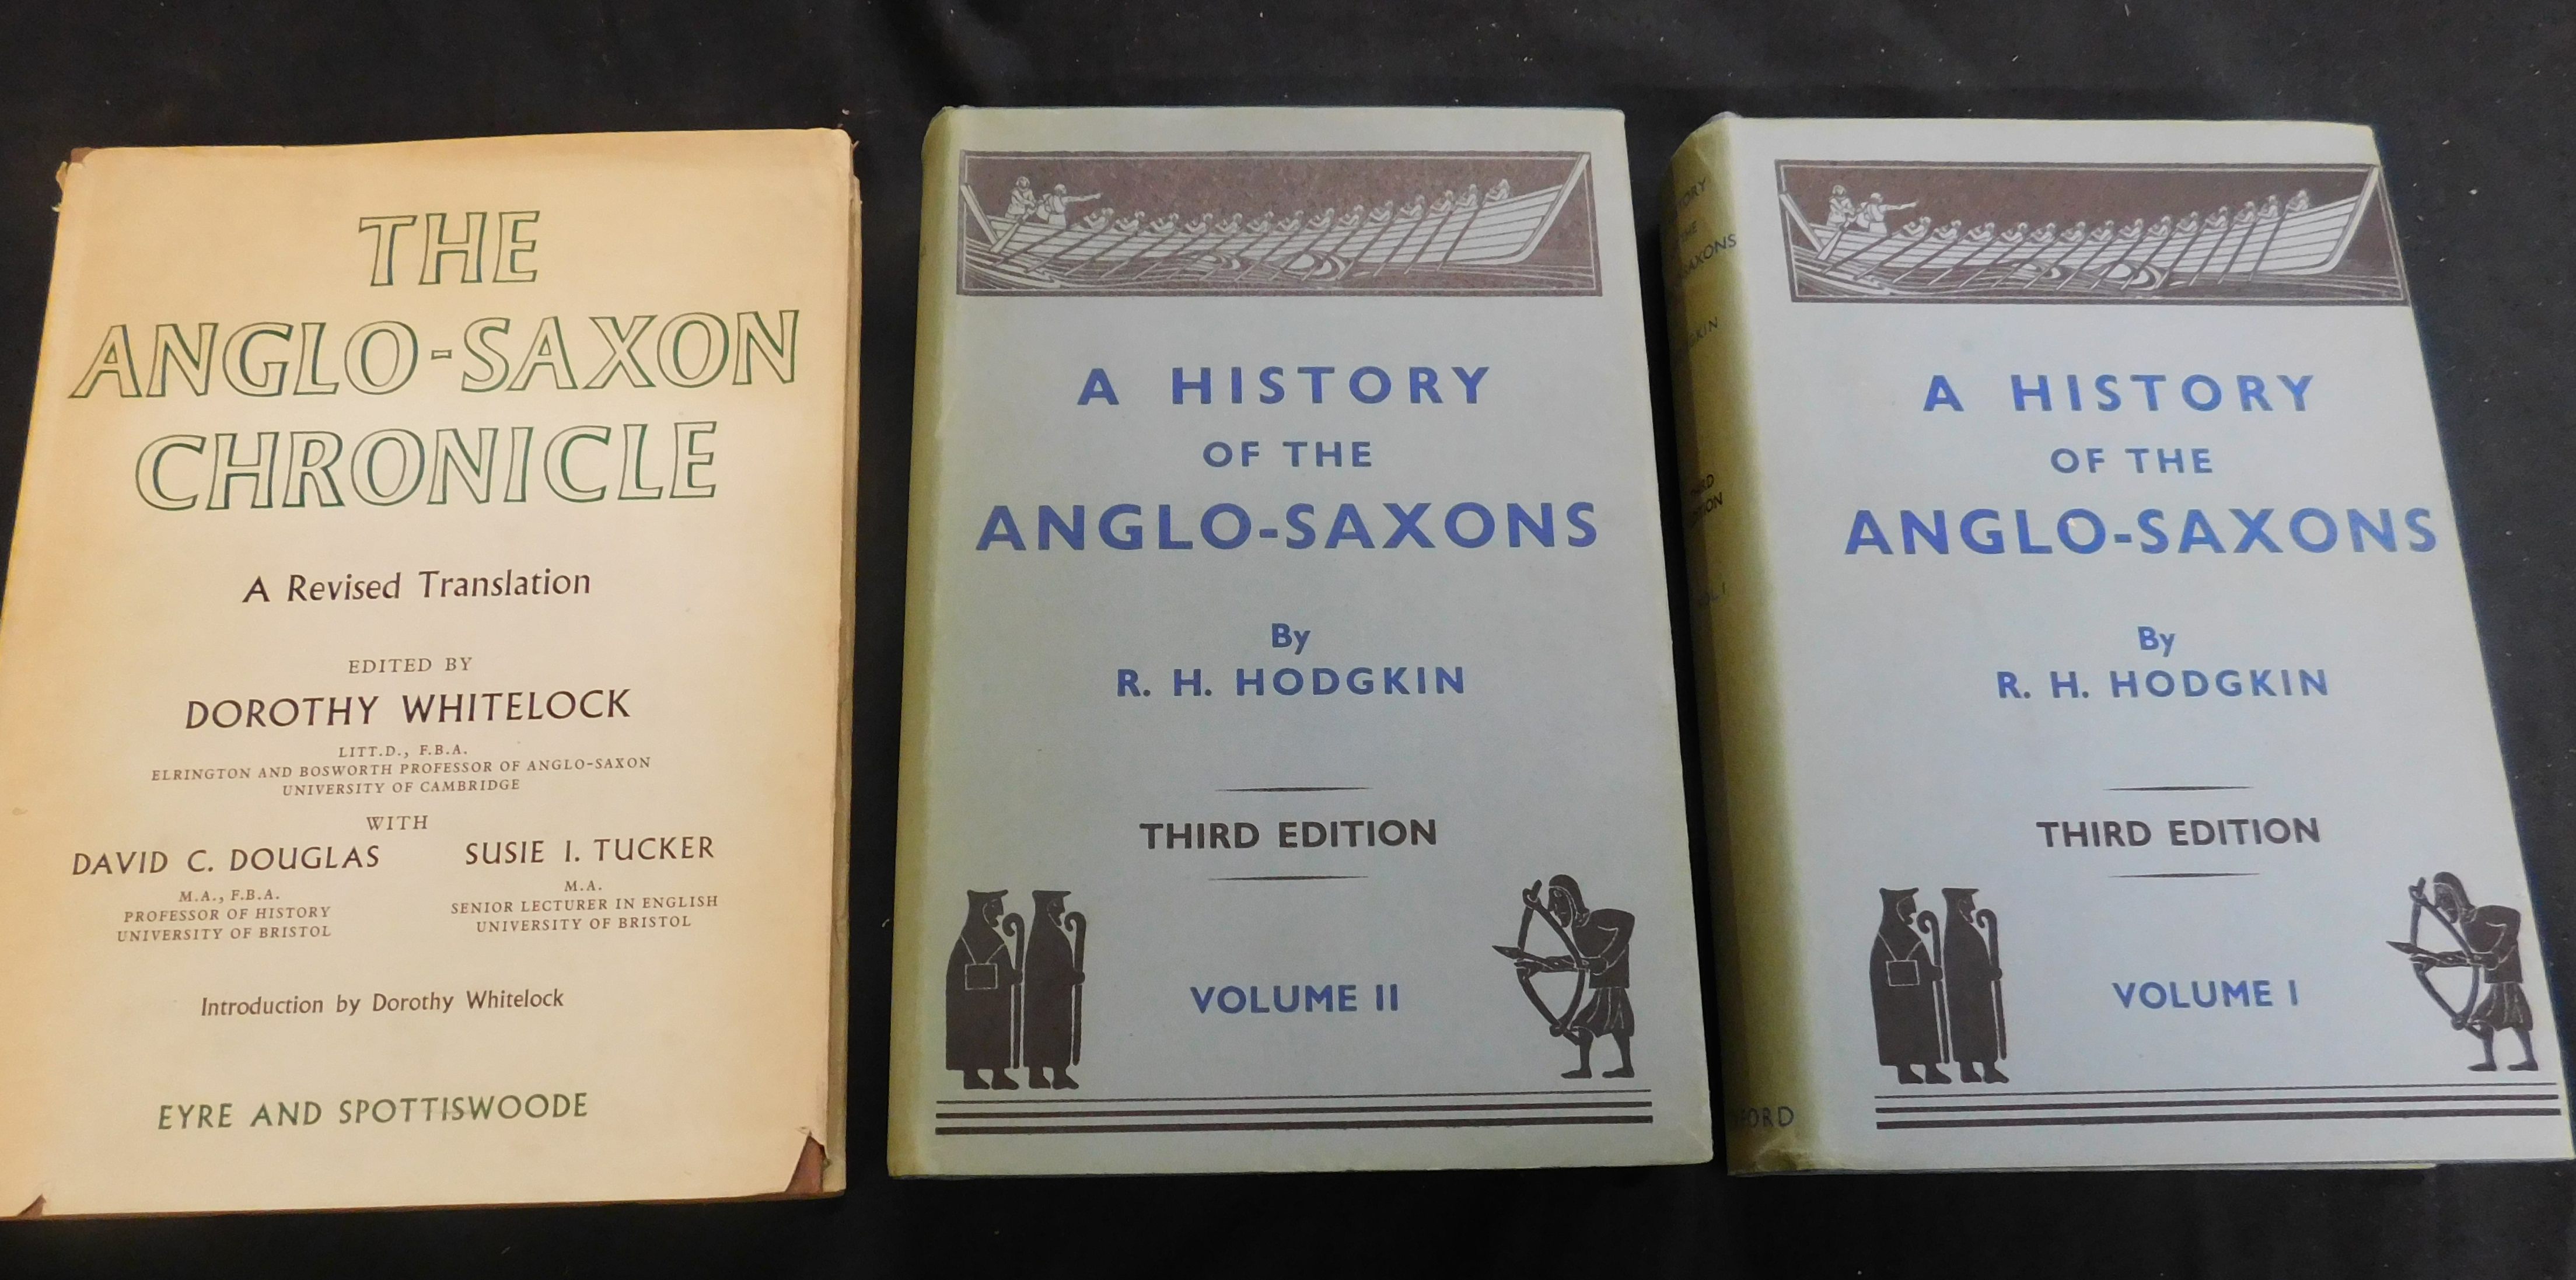 ROBERT HOWARD HODGKIN: THE HISTORY OF THE ANGLO-SAXONS, Oxford University Press, 1959, 3rd - Image 3 of 3